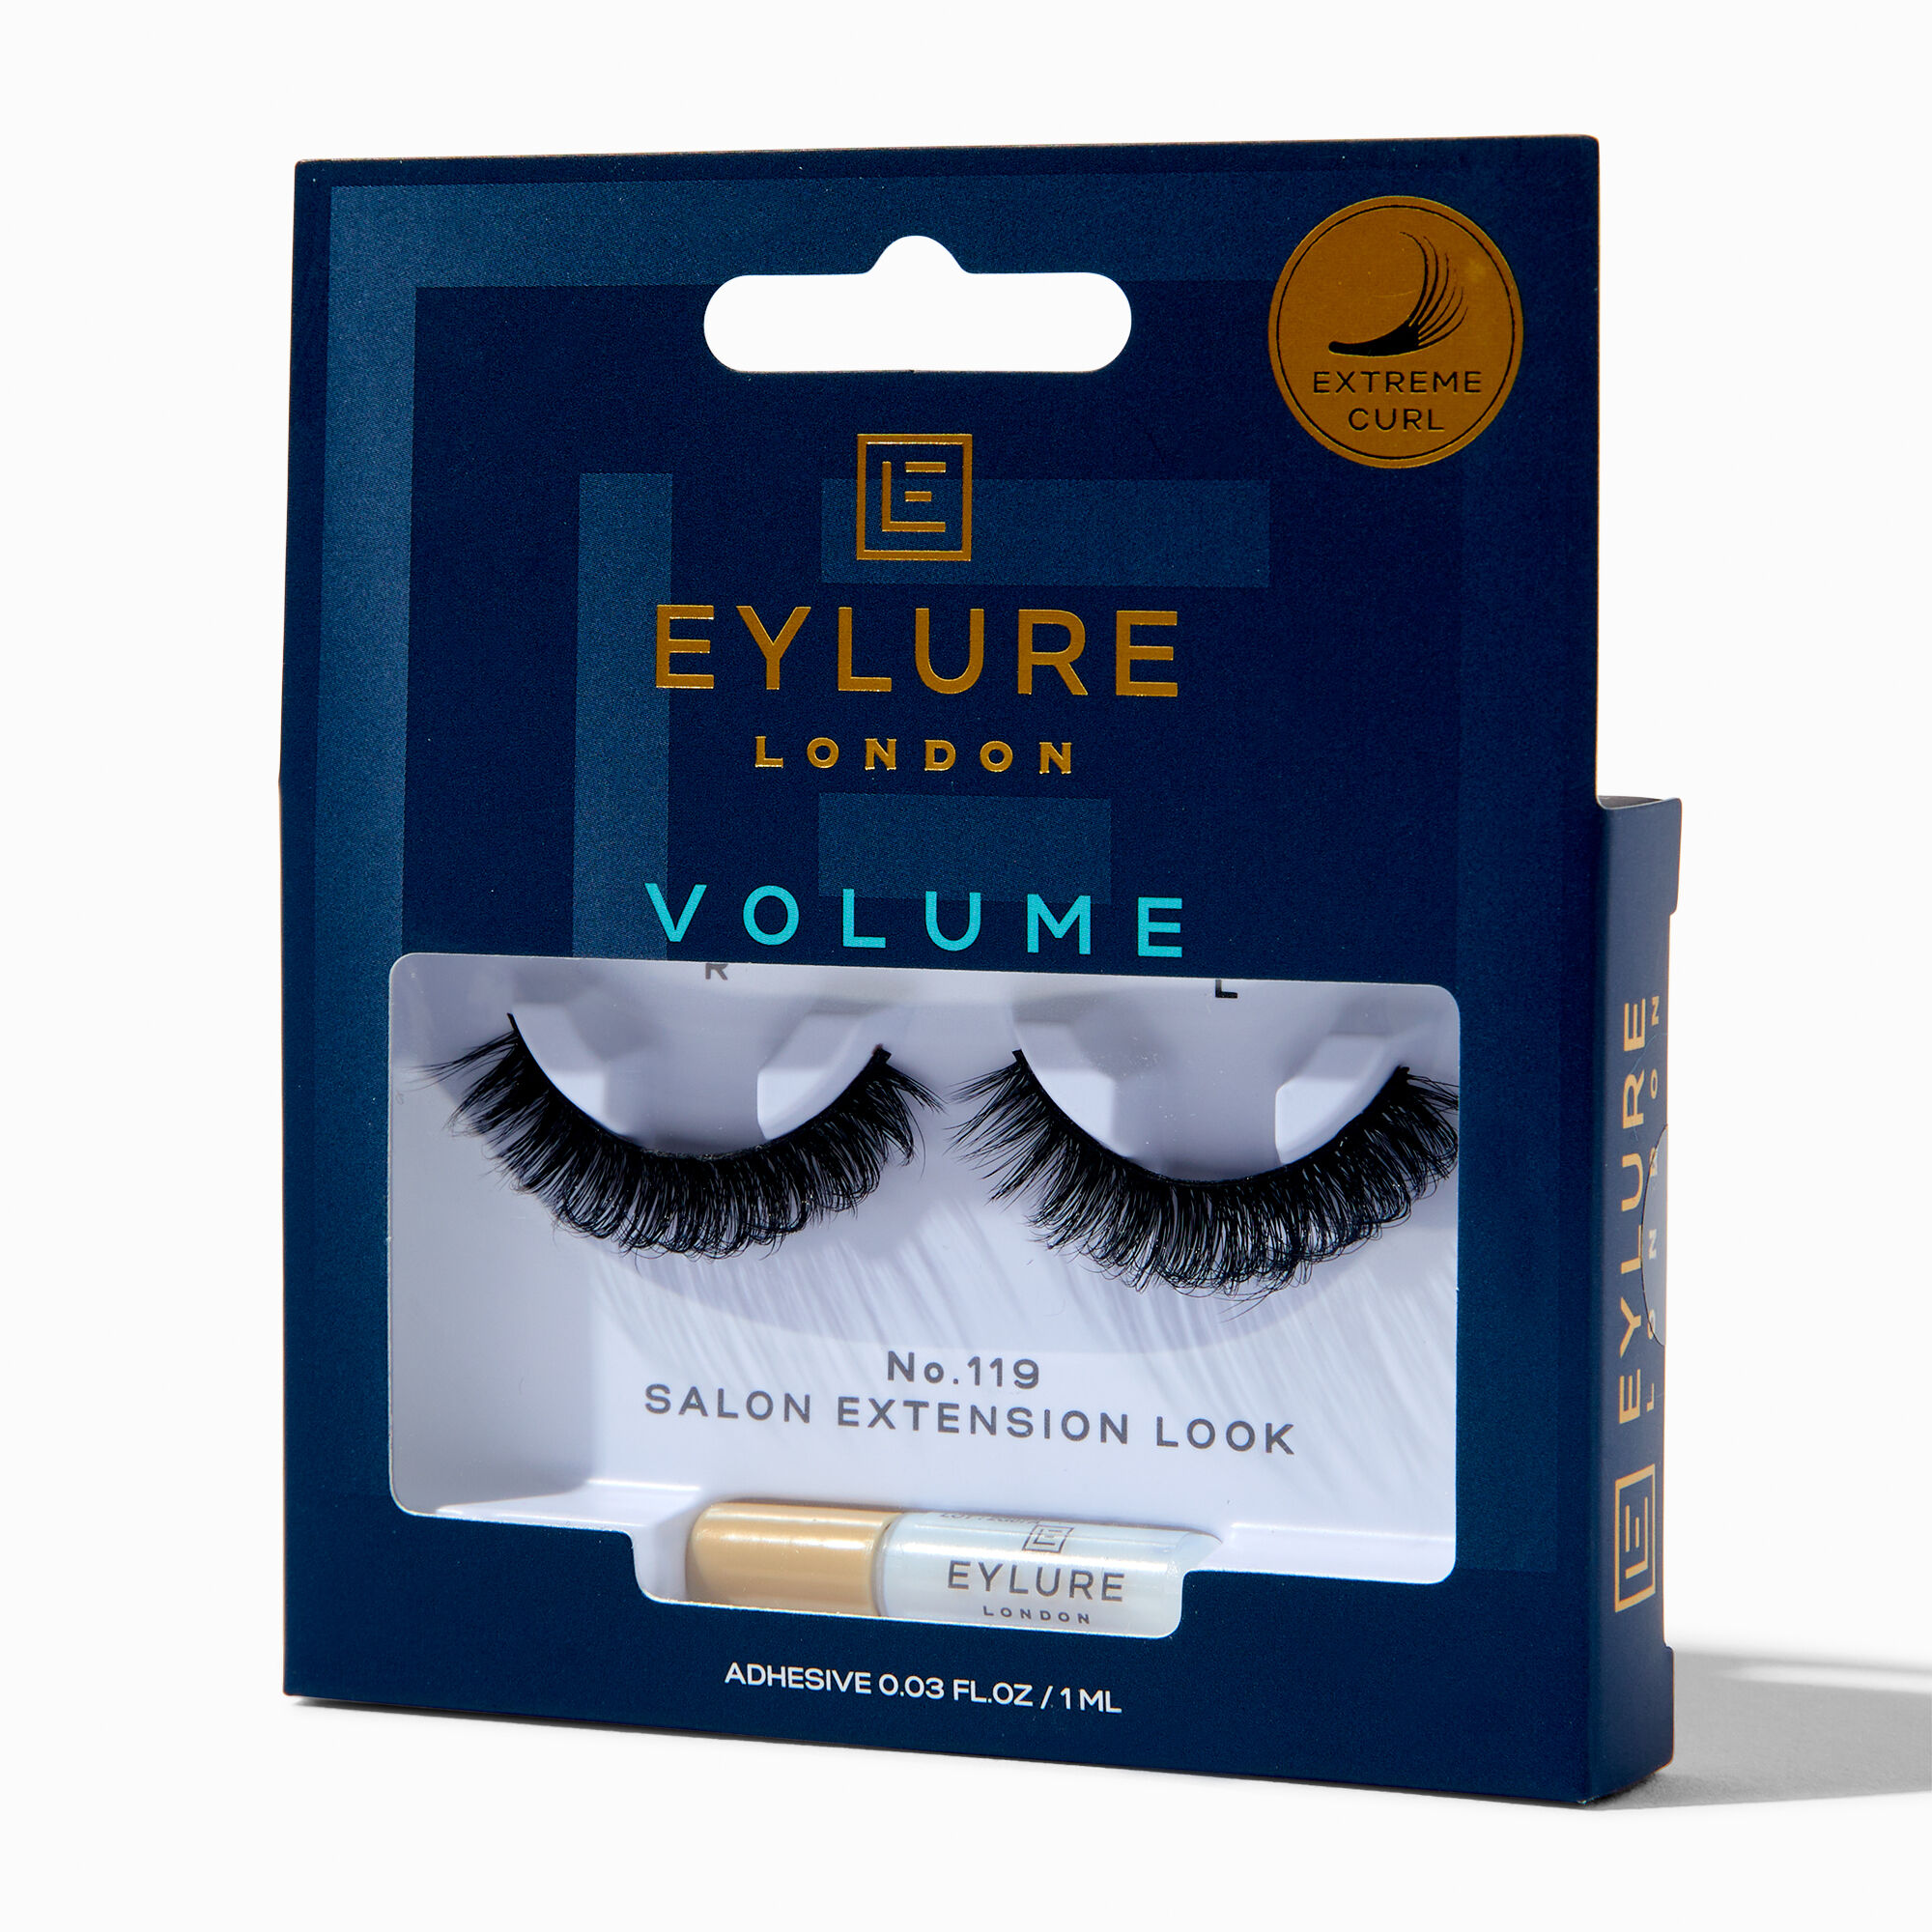 View Claires Eylure Volume Extreme Curl False Lashes No 119 information